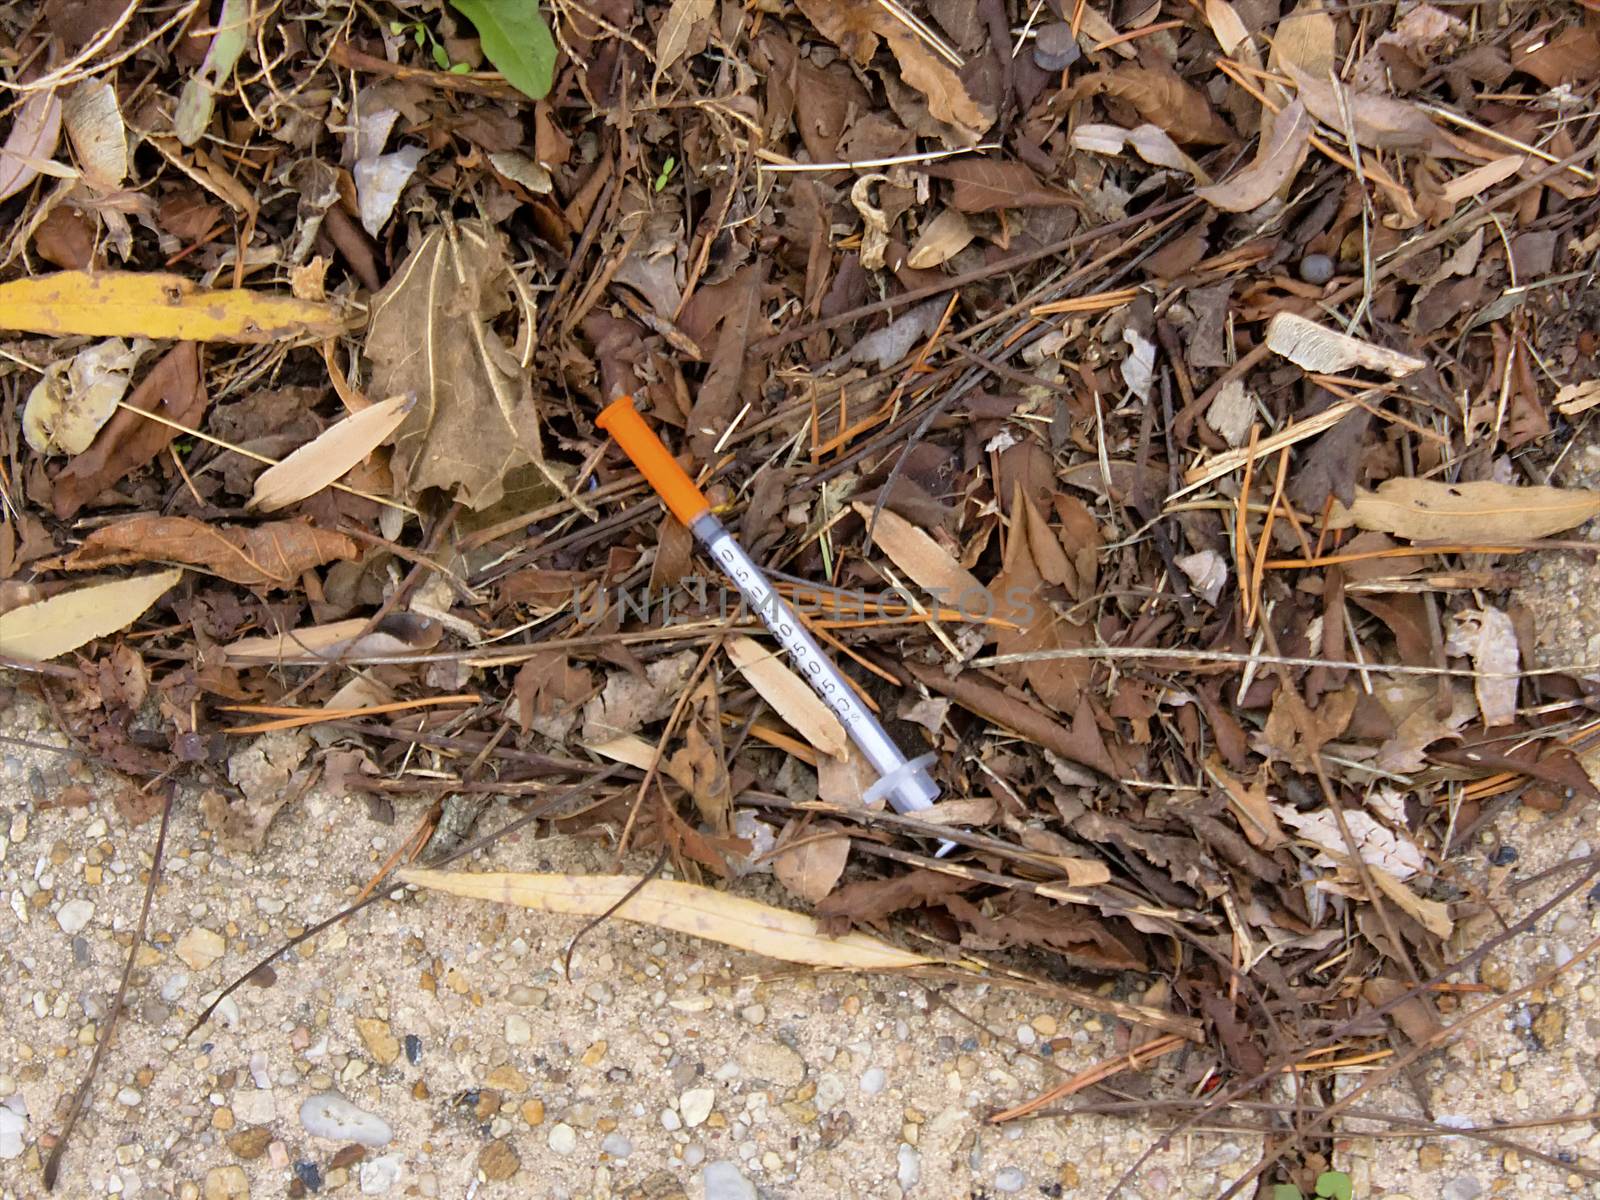 Hypodermic needle on street by CharlieFloyd